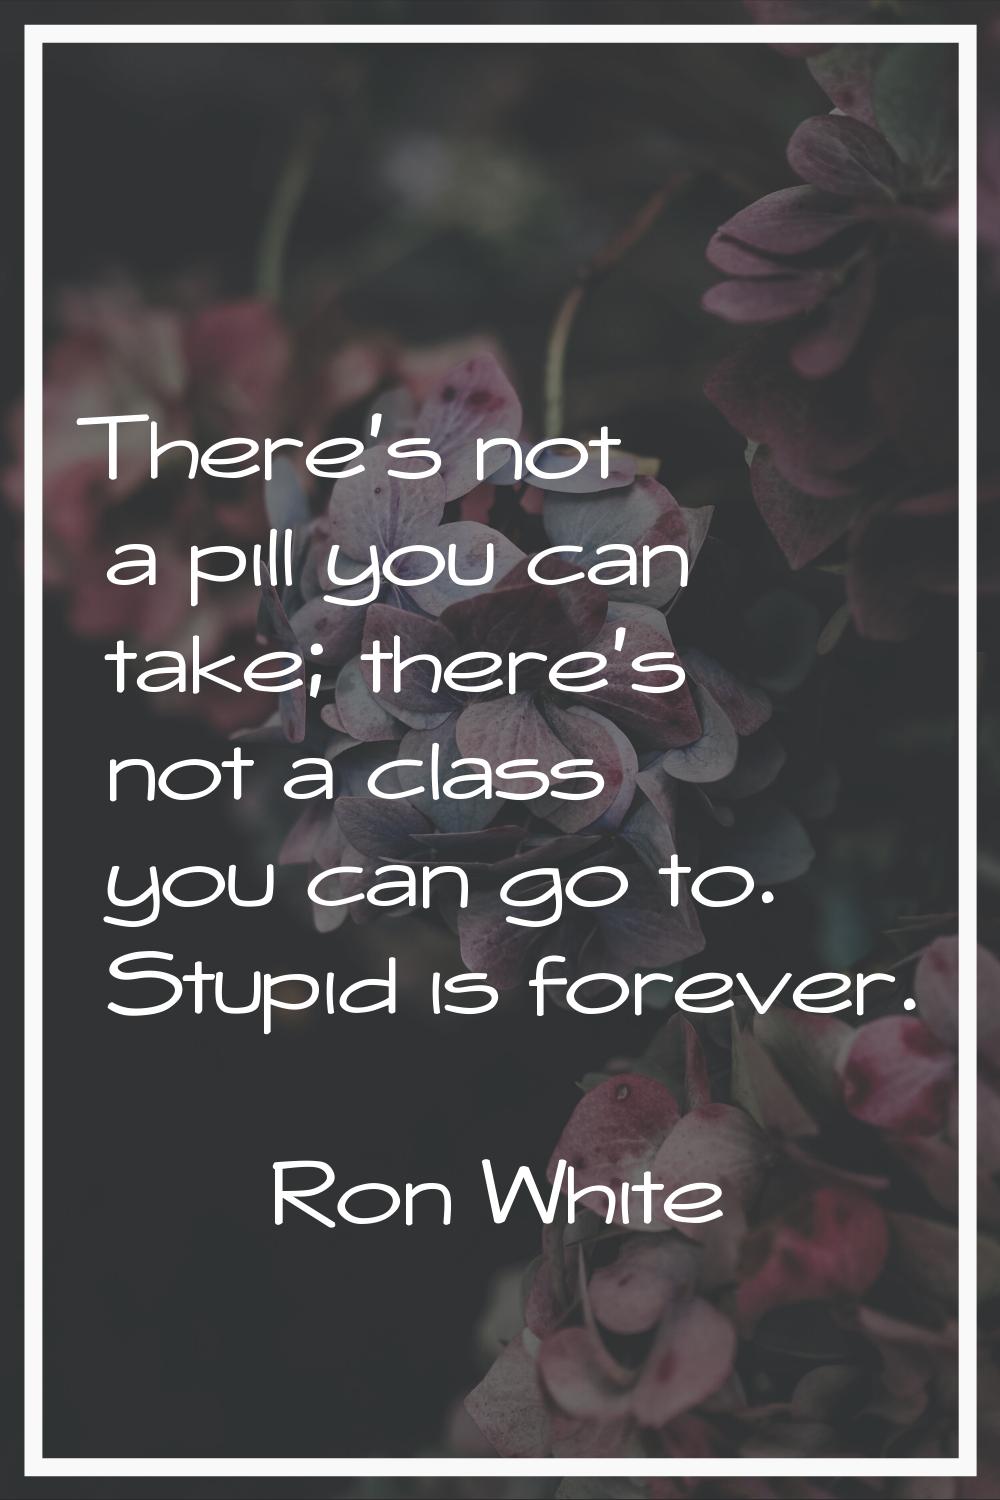 There's not a pill you can take; there's not a class you can go to. Stupid is forever.